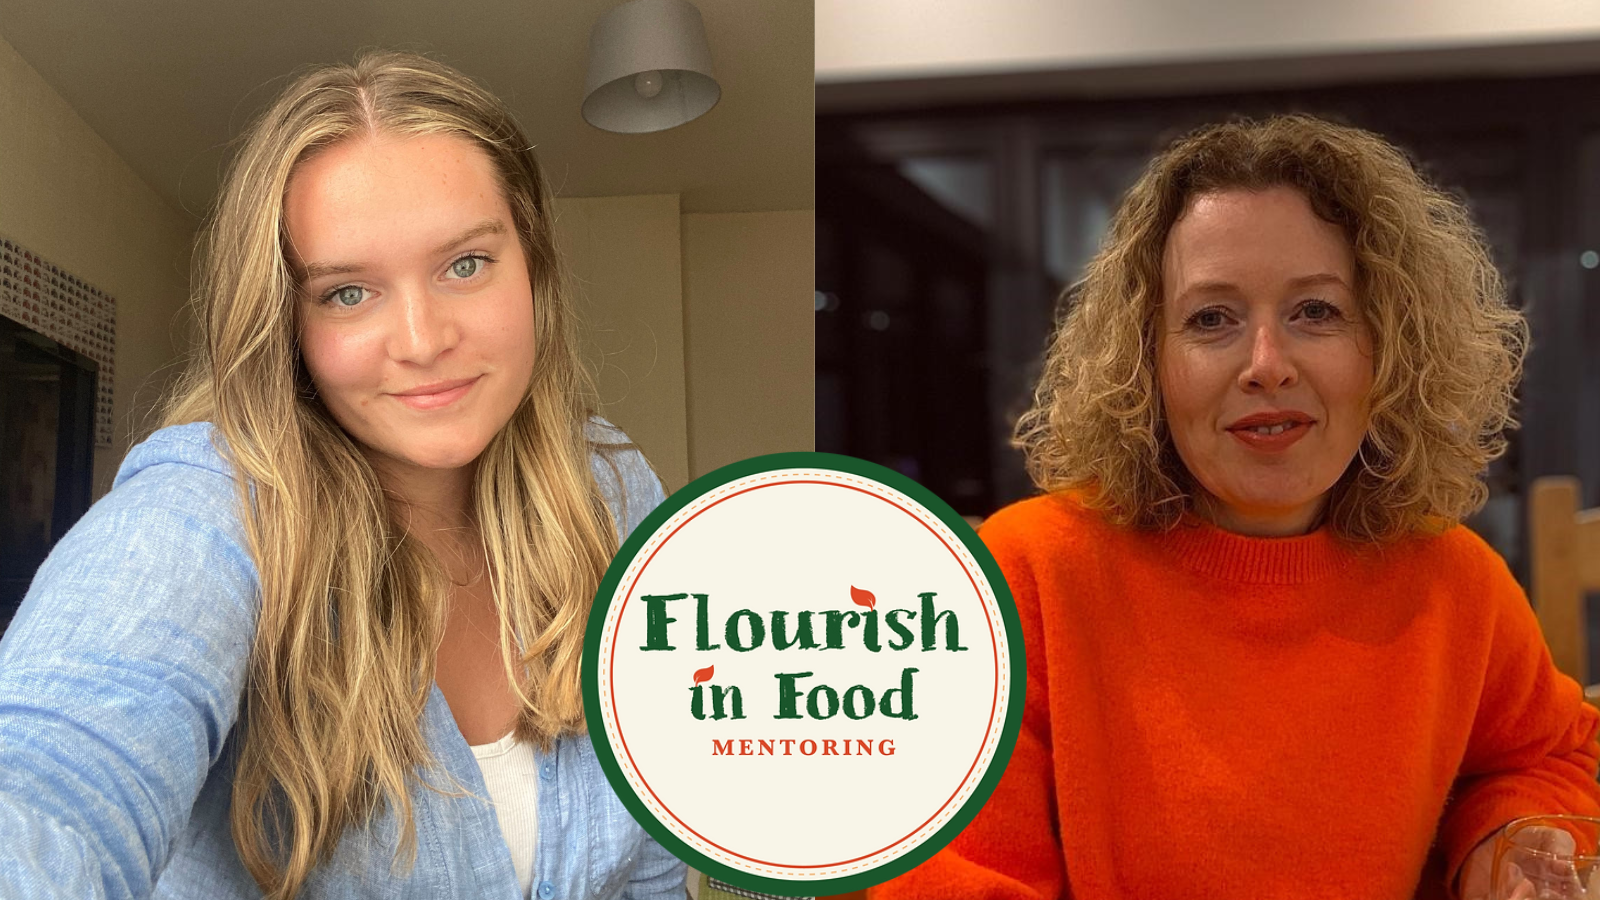 How to Flourish in Food: The transformative impacts of Mentoring